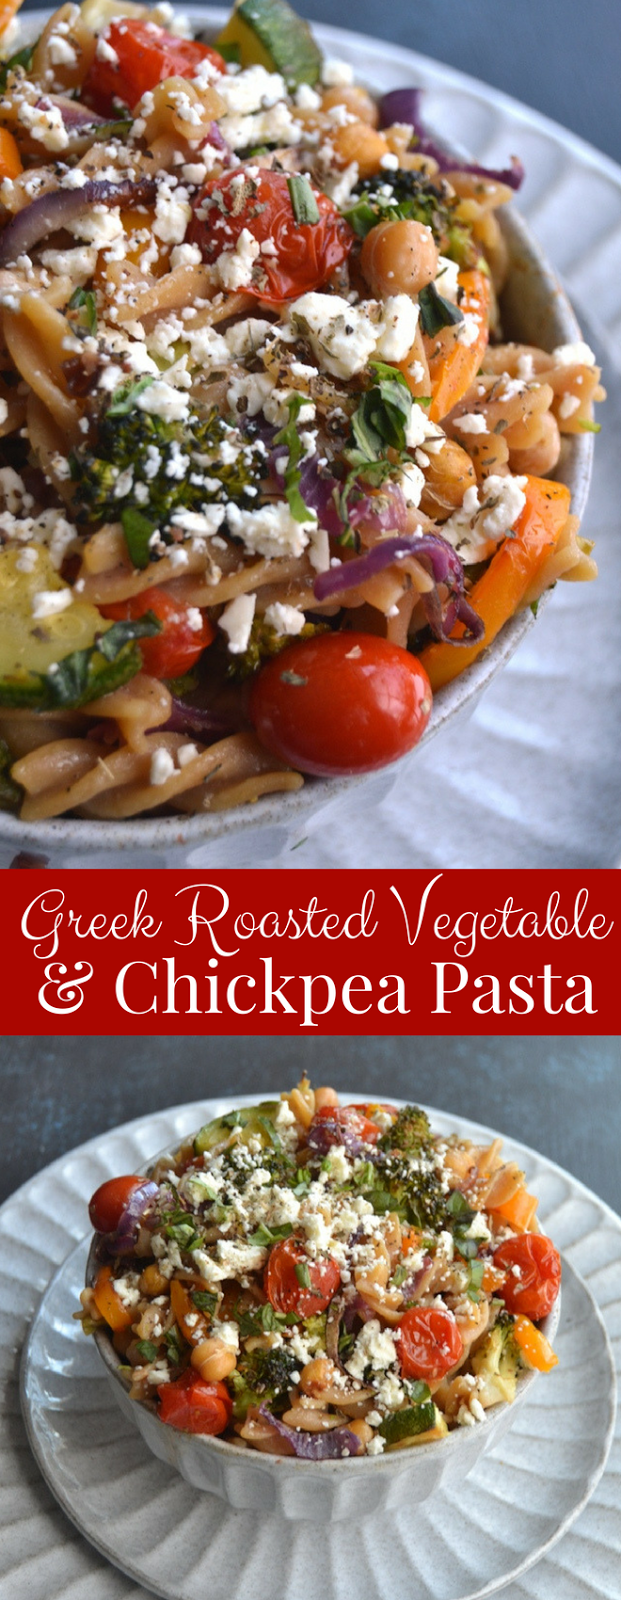 Greek Roasted Vegetable and Chickpea Pasta is made with roasted chickpeas, feta cheese, loads of roasted veggies and an easy lemon vinaigrette for a delicious meal! www.nutritionistreviews.com